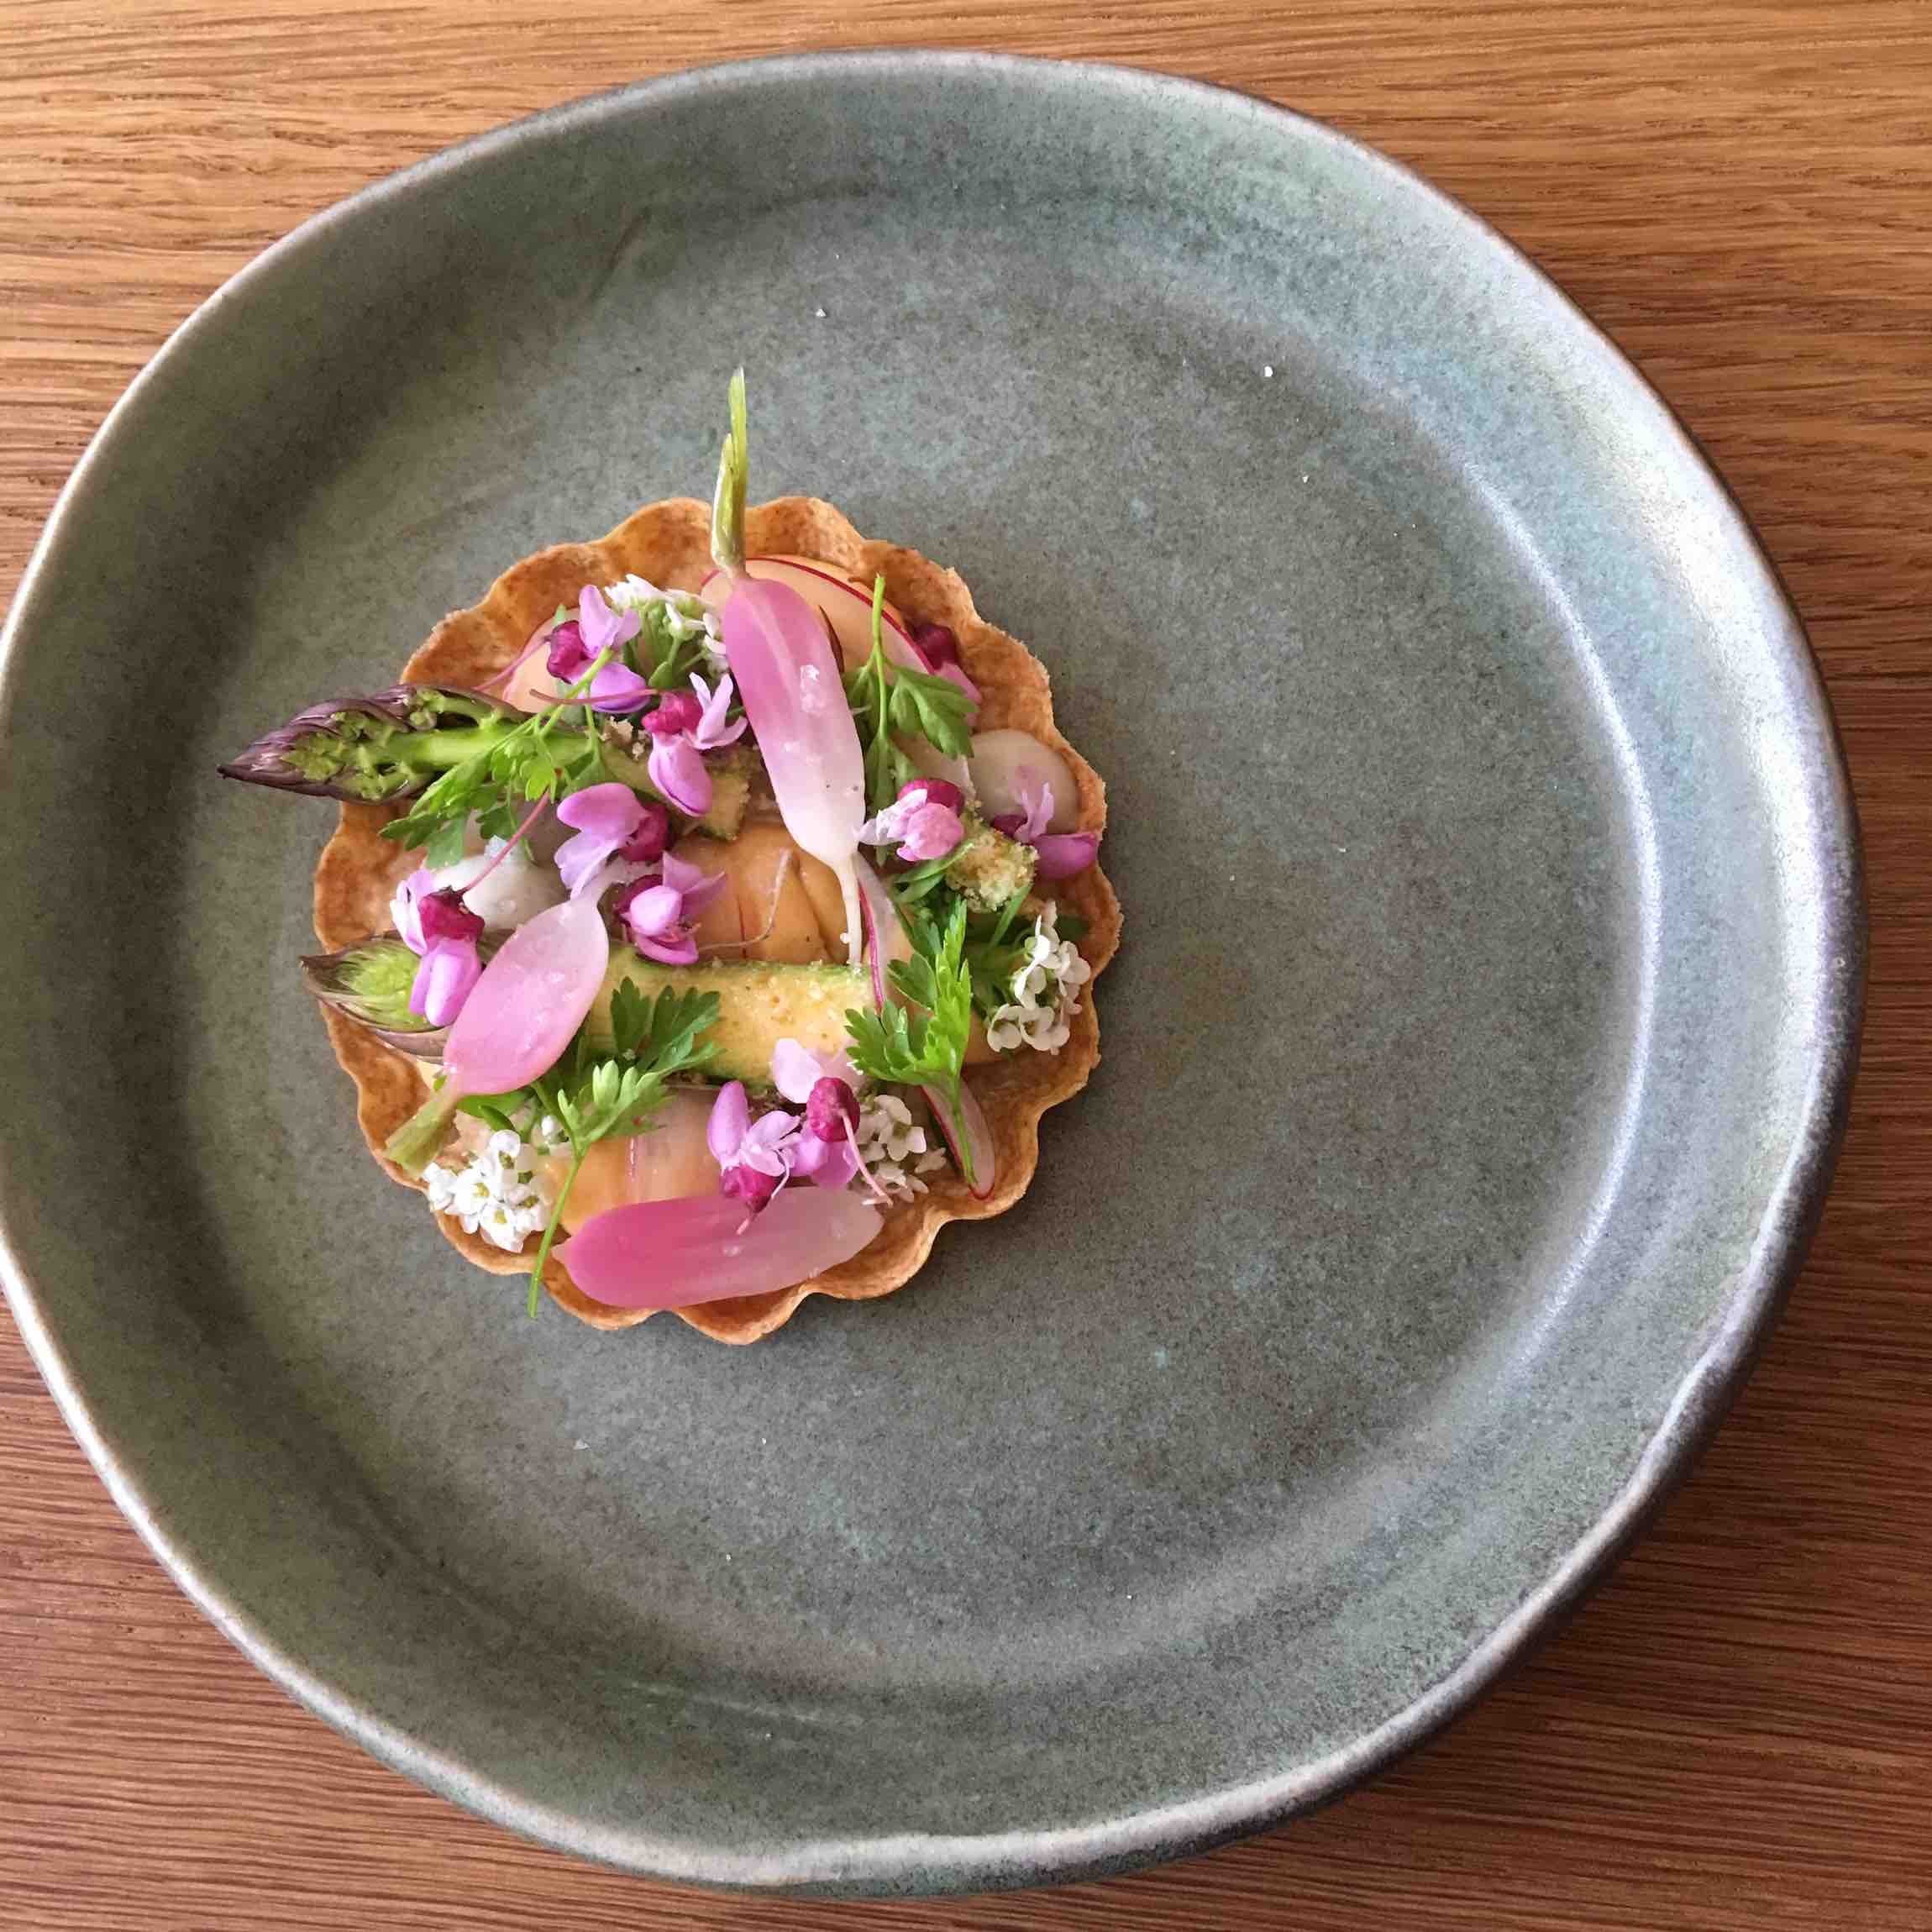 Eater reviews MÄS in its roundup of the essential restaurants in Ashland, Oregon.